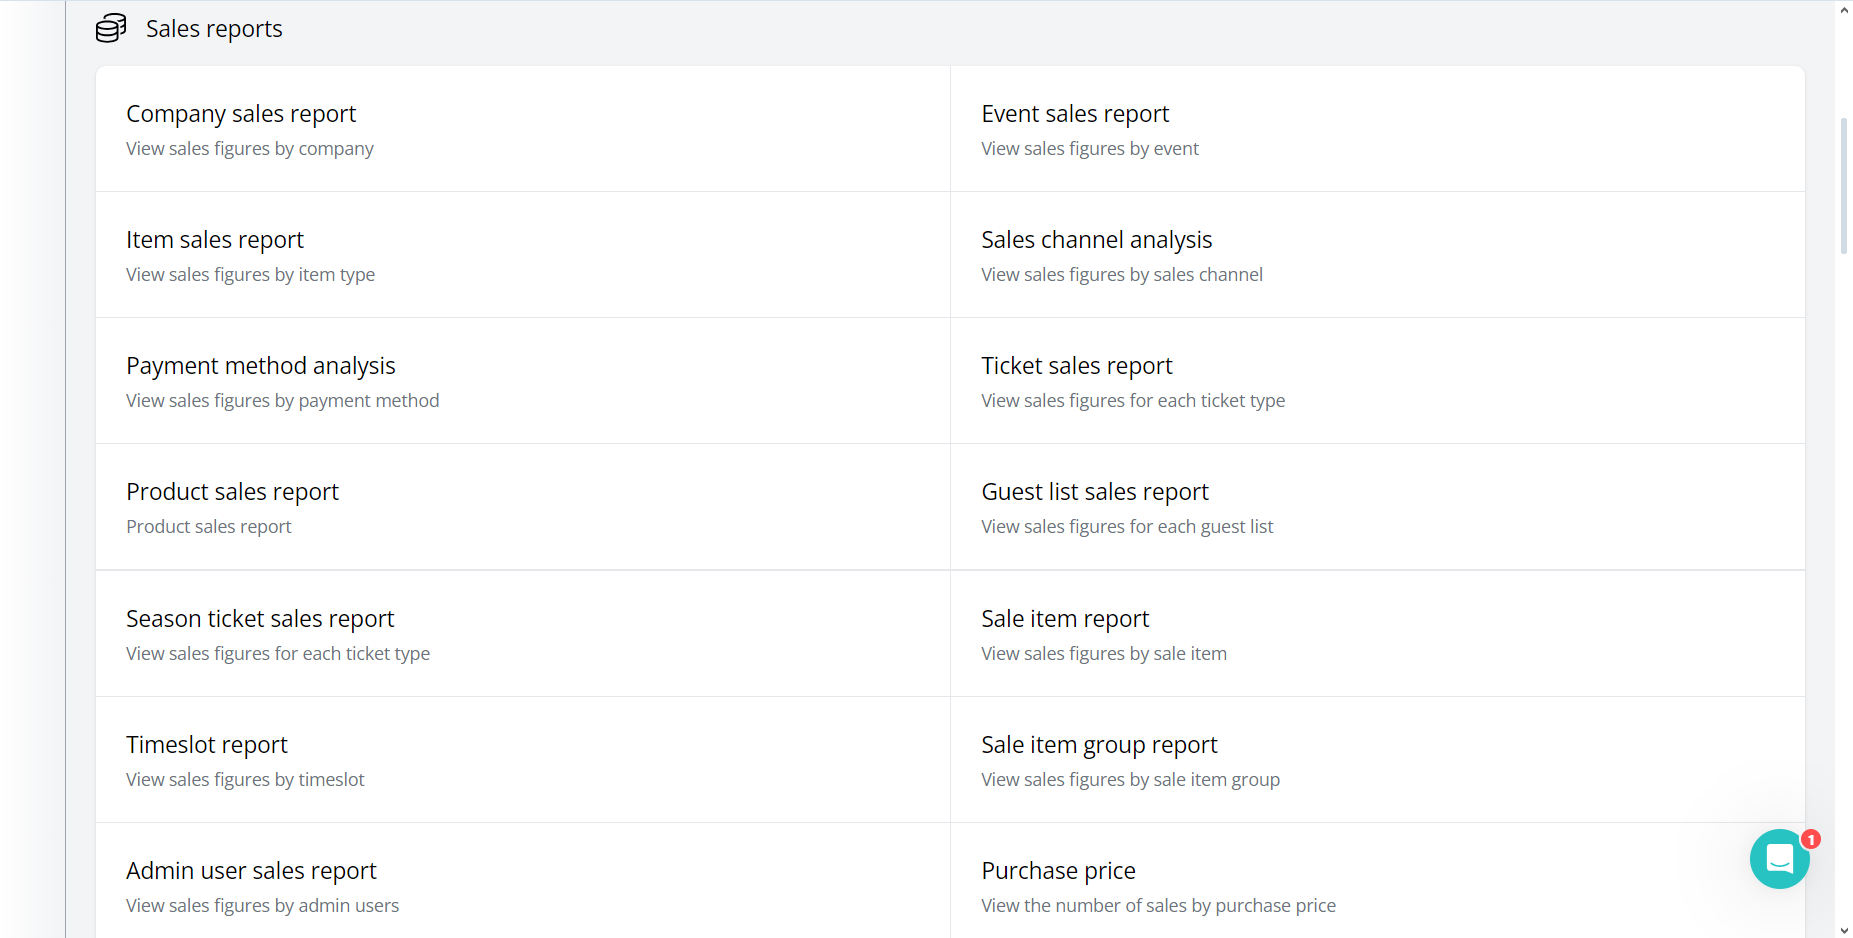 Detailed reports for all relevant metrics - from payment gateway usage and customizable sales reports to average guest attendance duration and discount code usage.